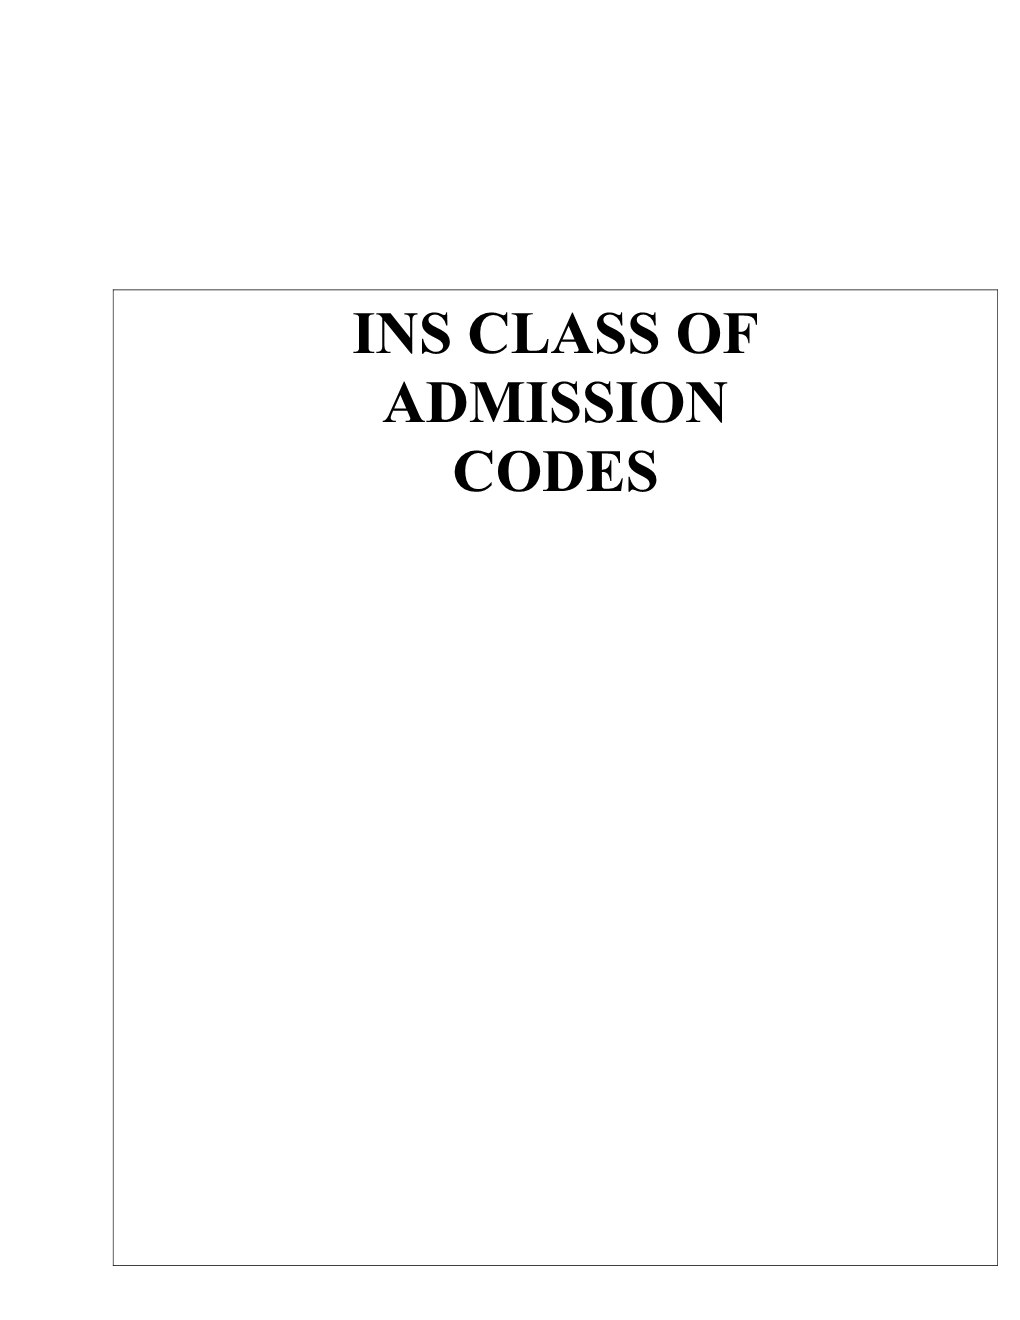 Class of Admission Under the Immigrant Laws, Codes